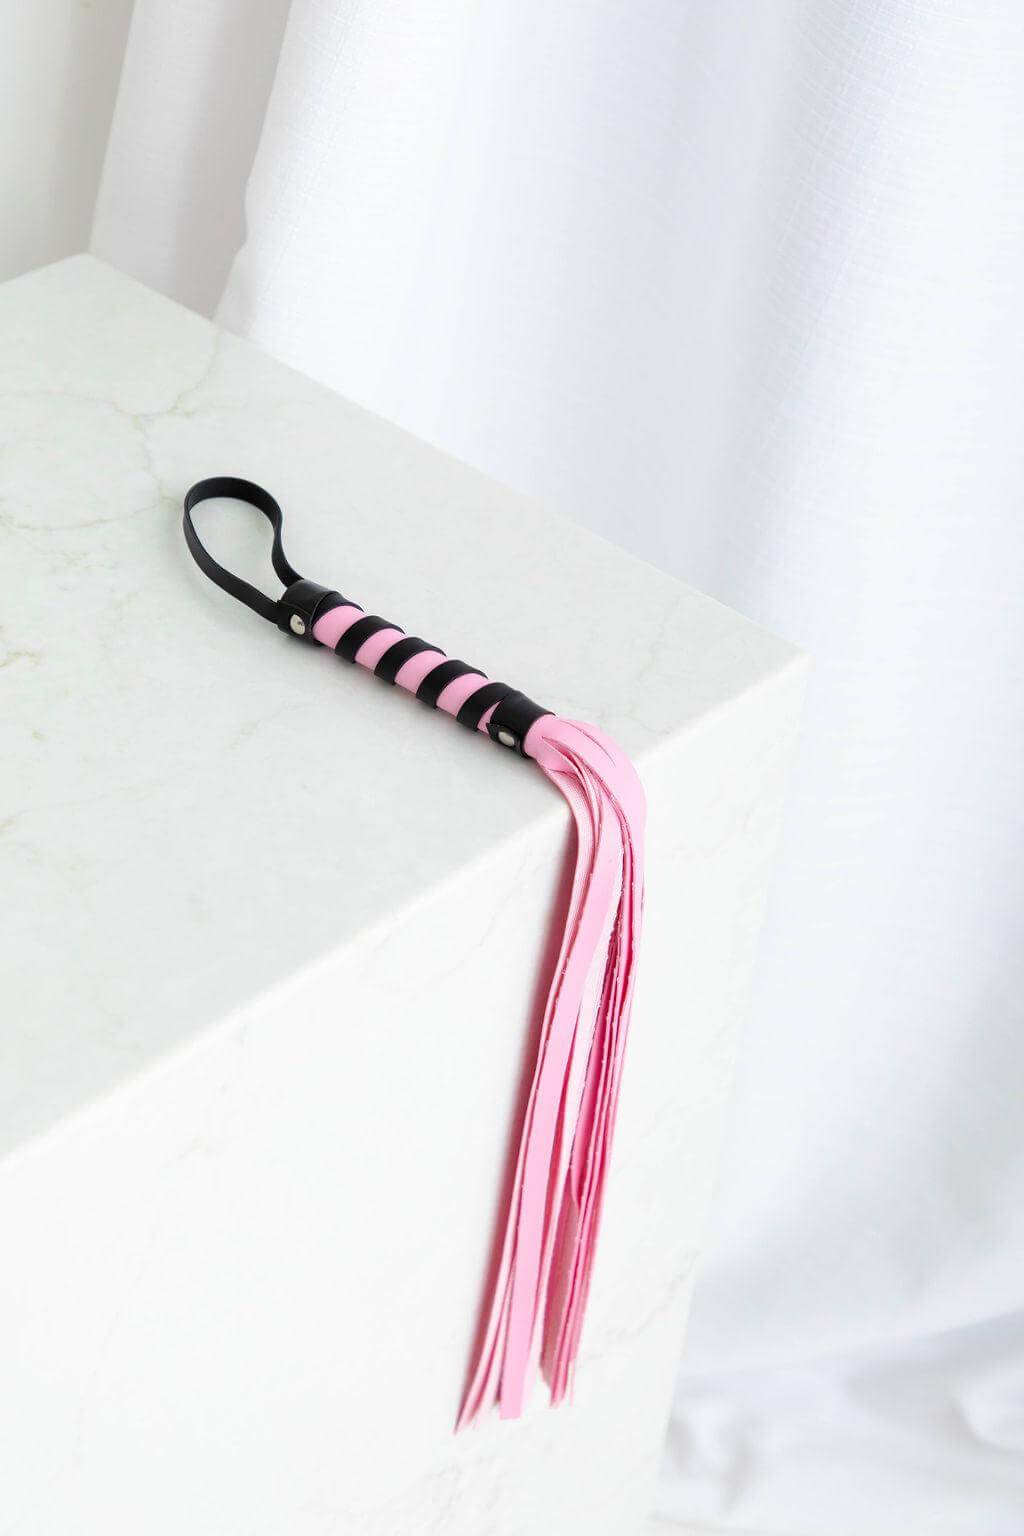 Candy Whip Pink - $24.00 - Whip - Naked Curve